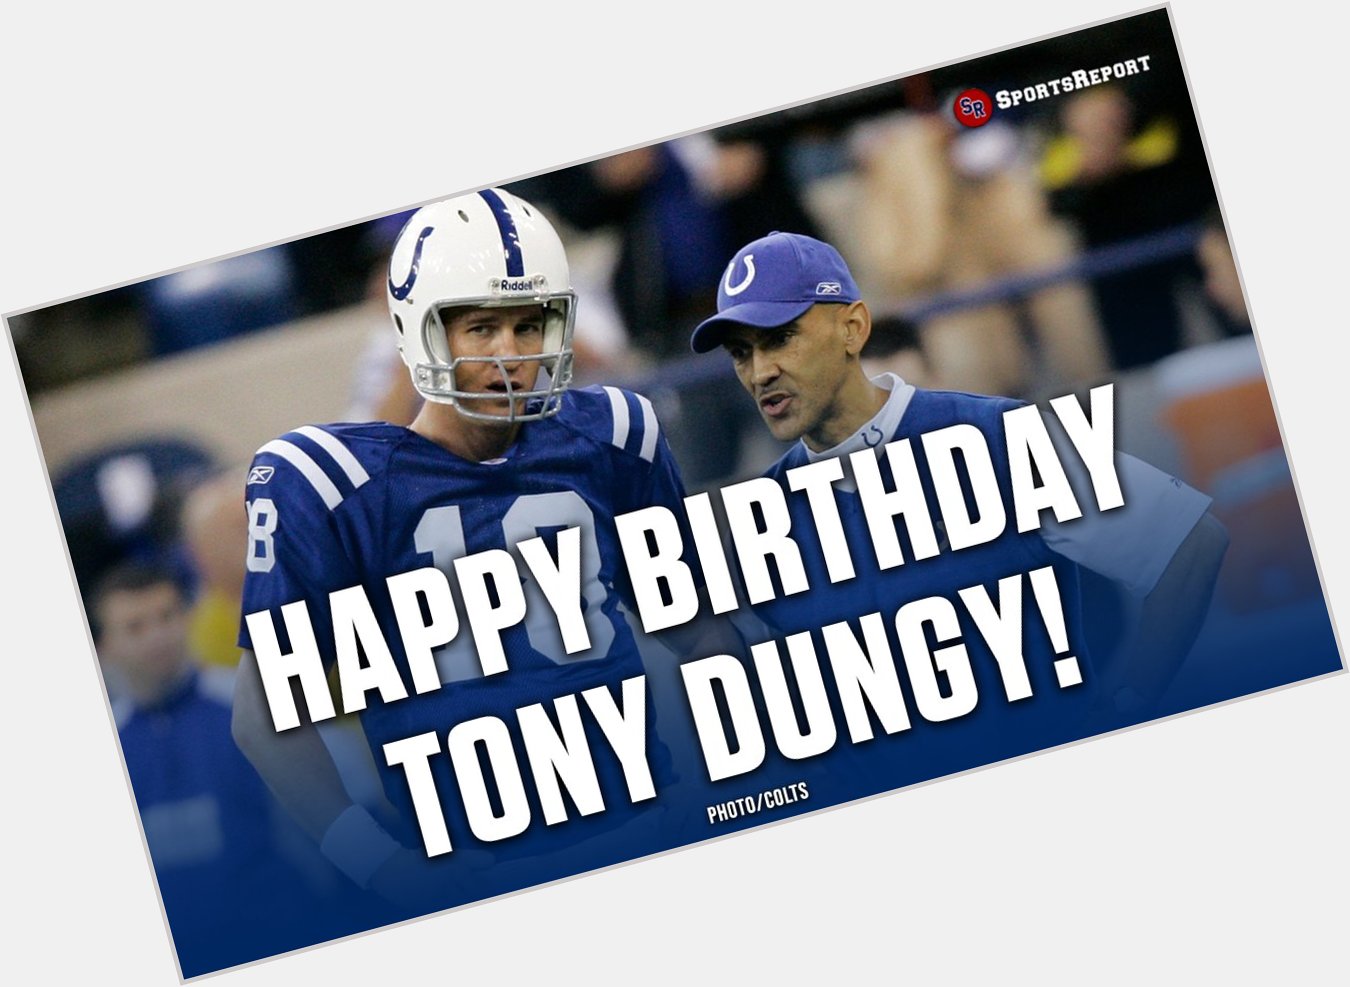  Fans, let\s wish legend Tony Dungy a Happy Birthday! GO COLTS!! 